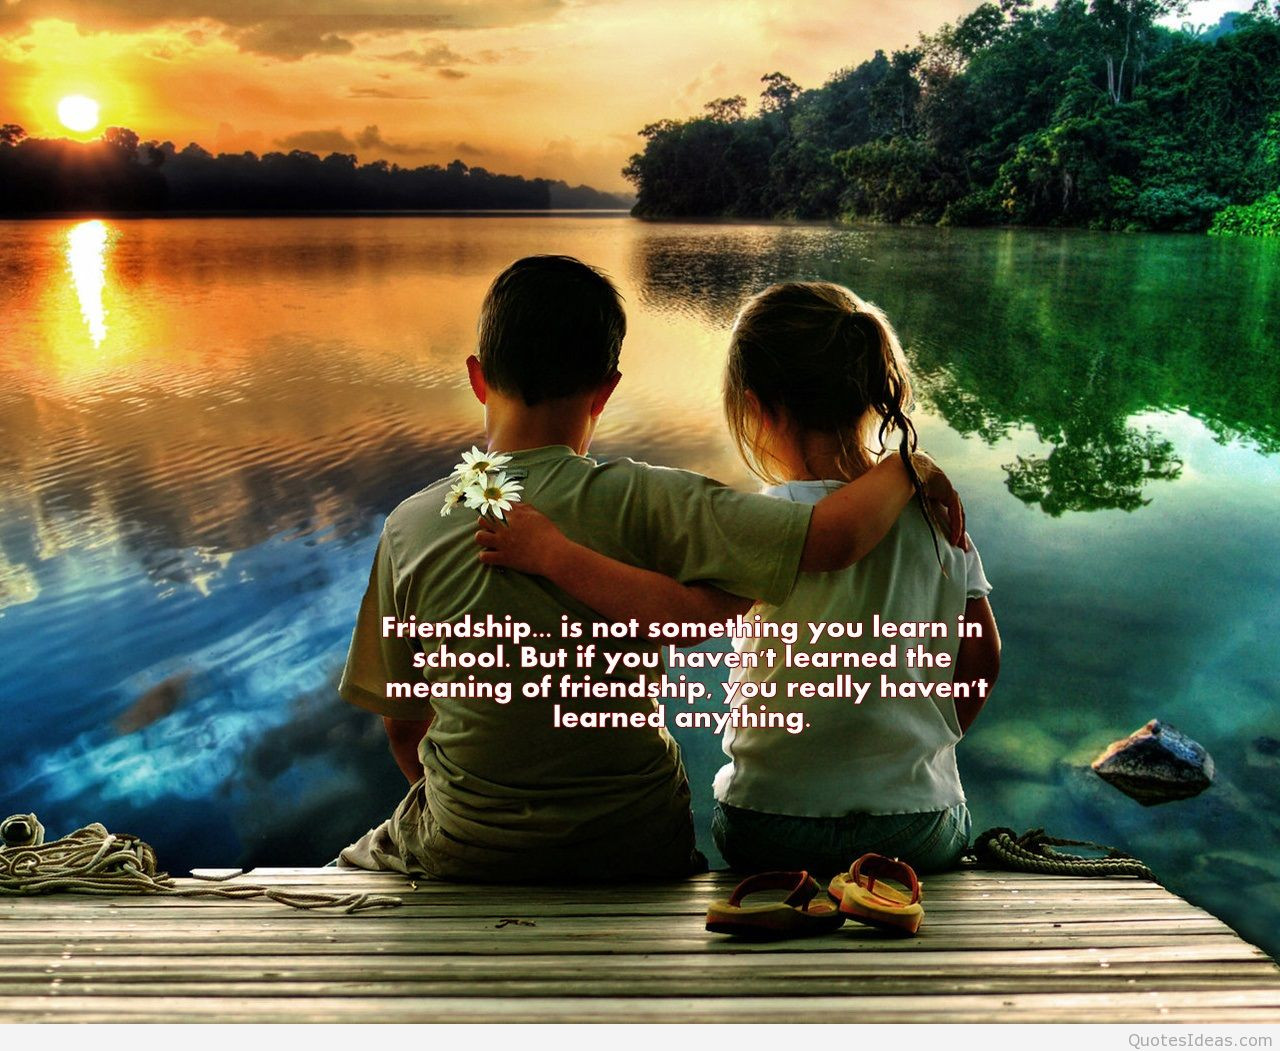 Children Friendship Quotes
 Friendship image with kids and quote